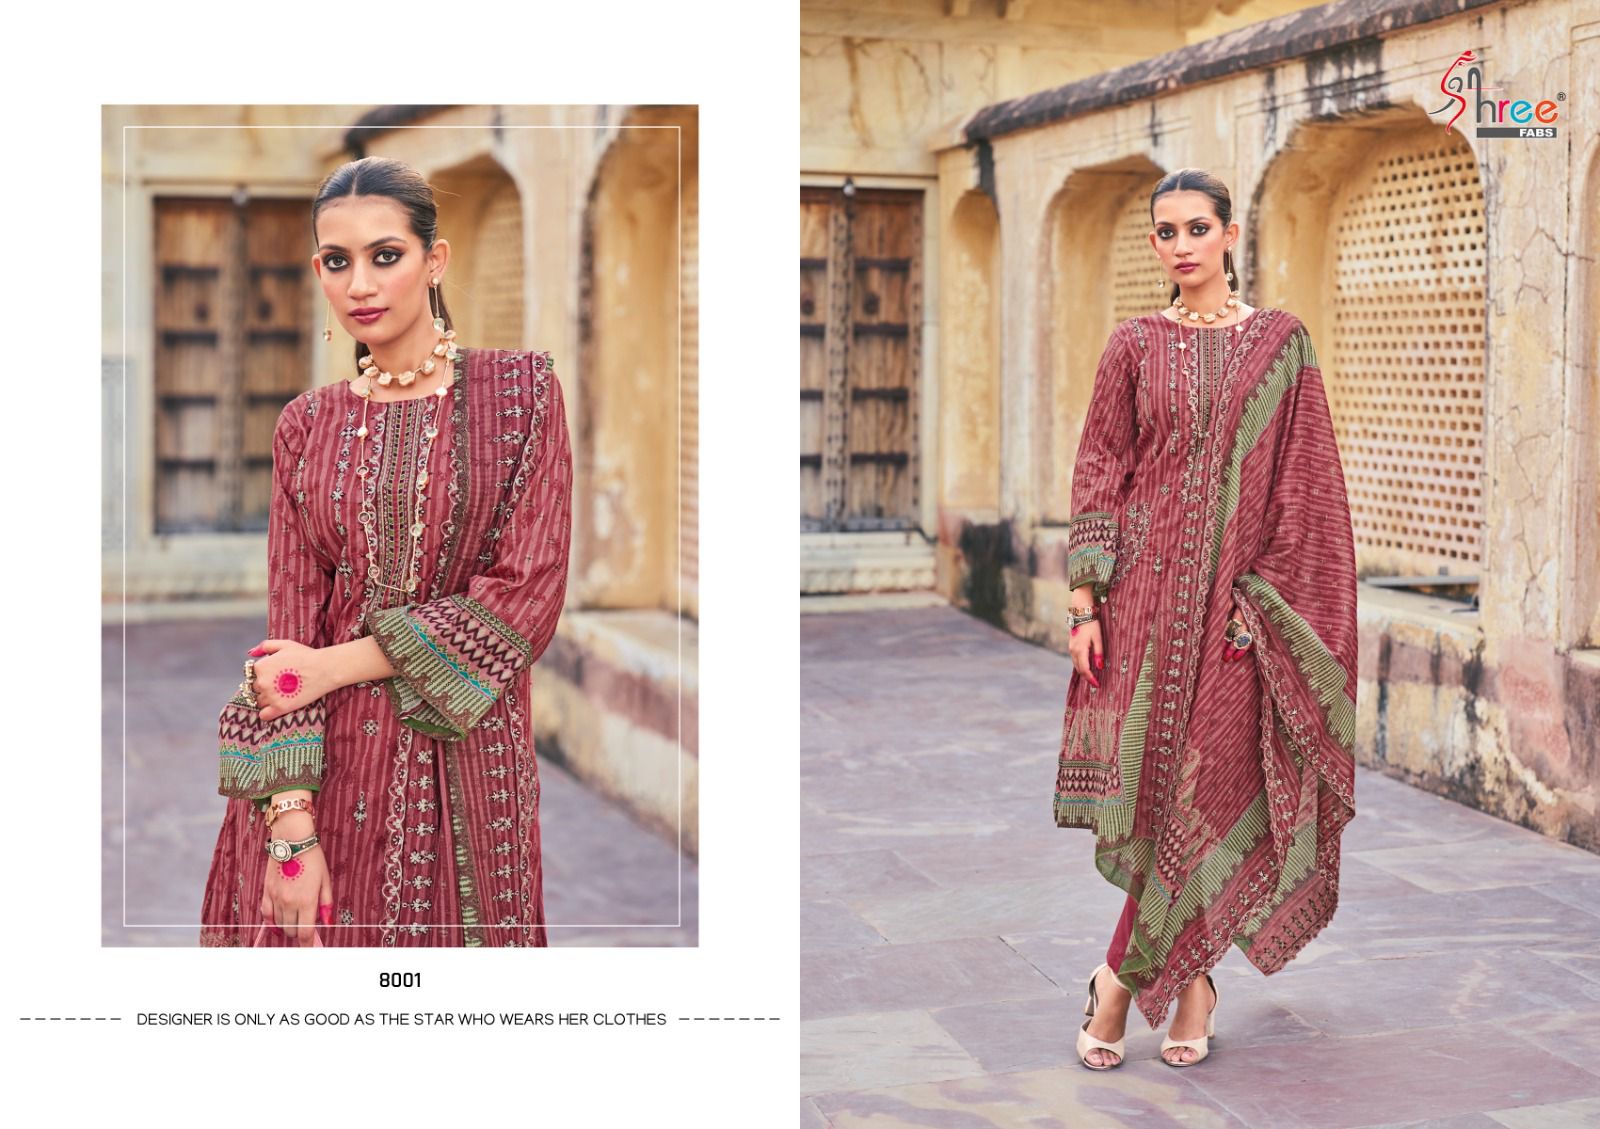 Shree fabs Bin saeed lawn collection vol 8 lawn cotton with self embroidery work pakistani dress wholesaler - jilaniwholesalesuit